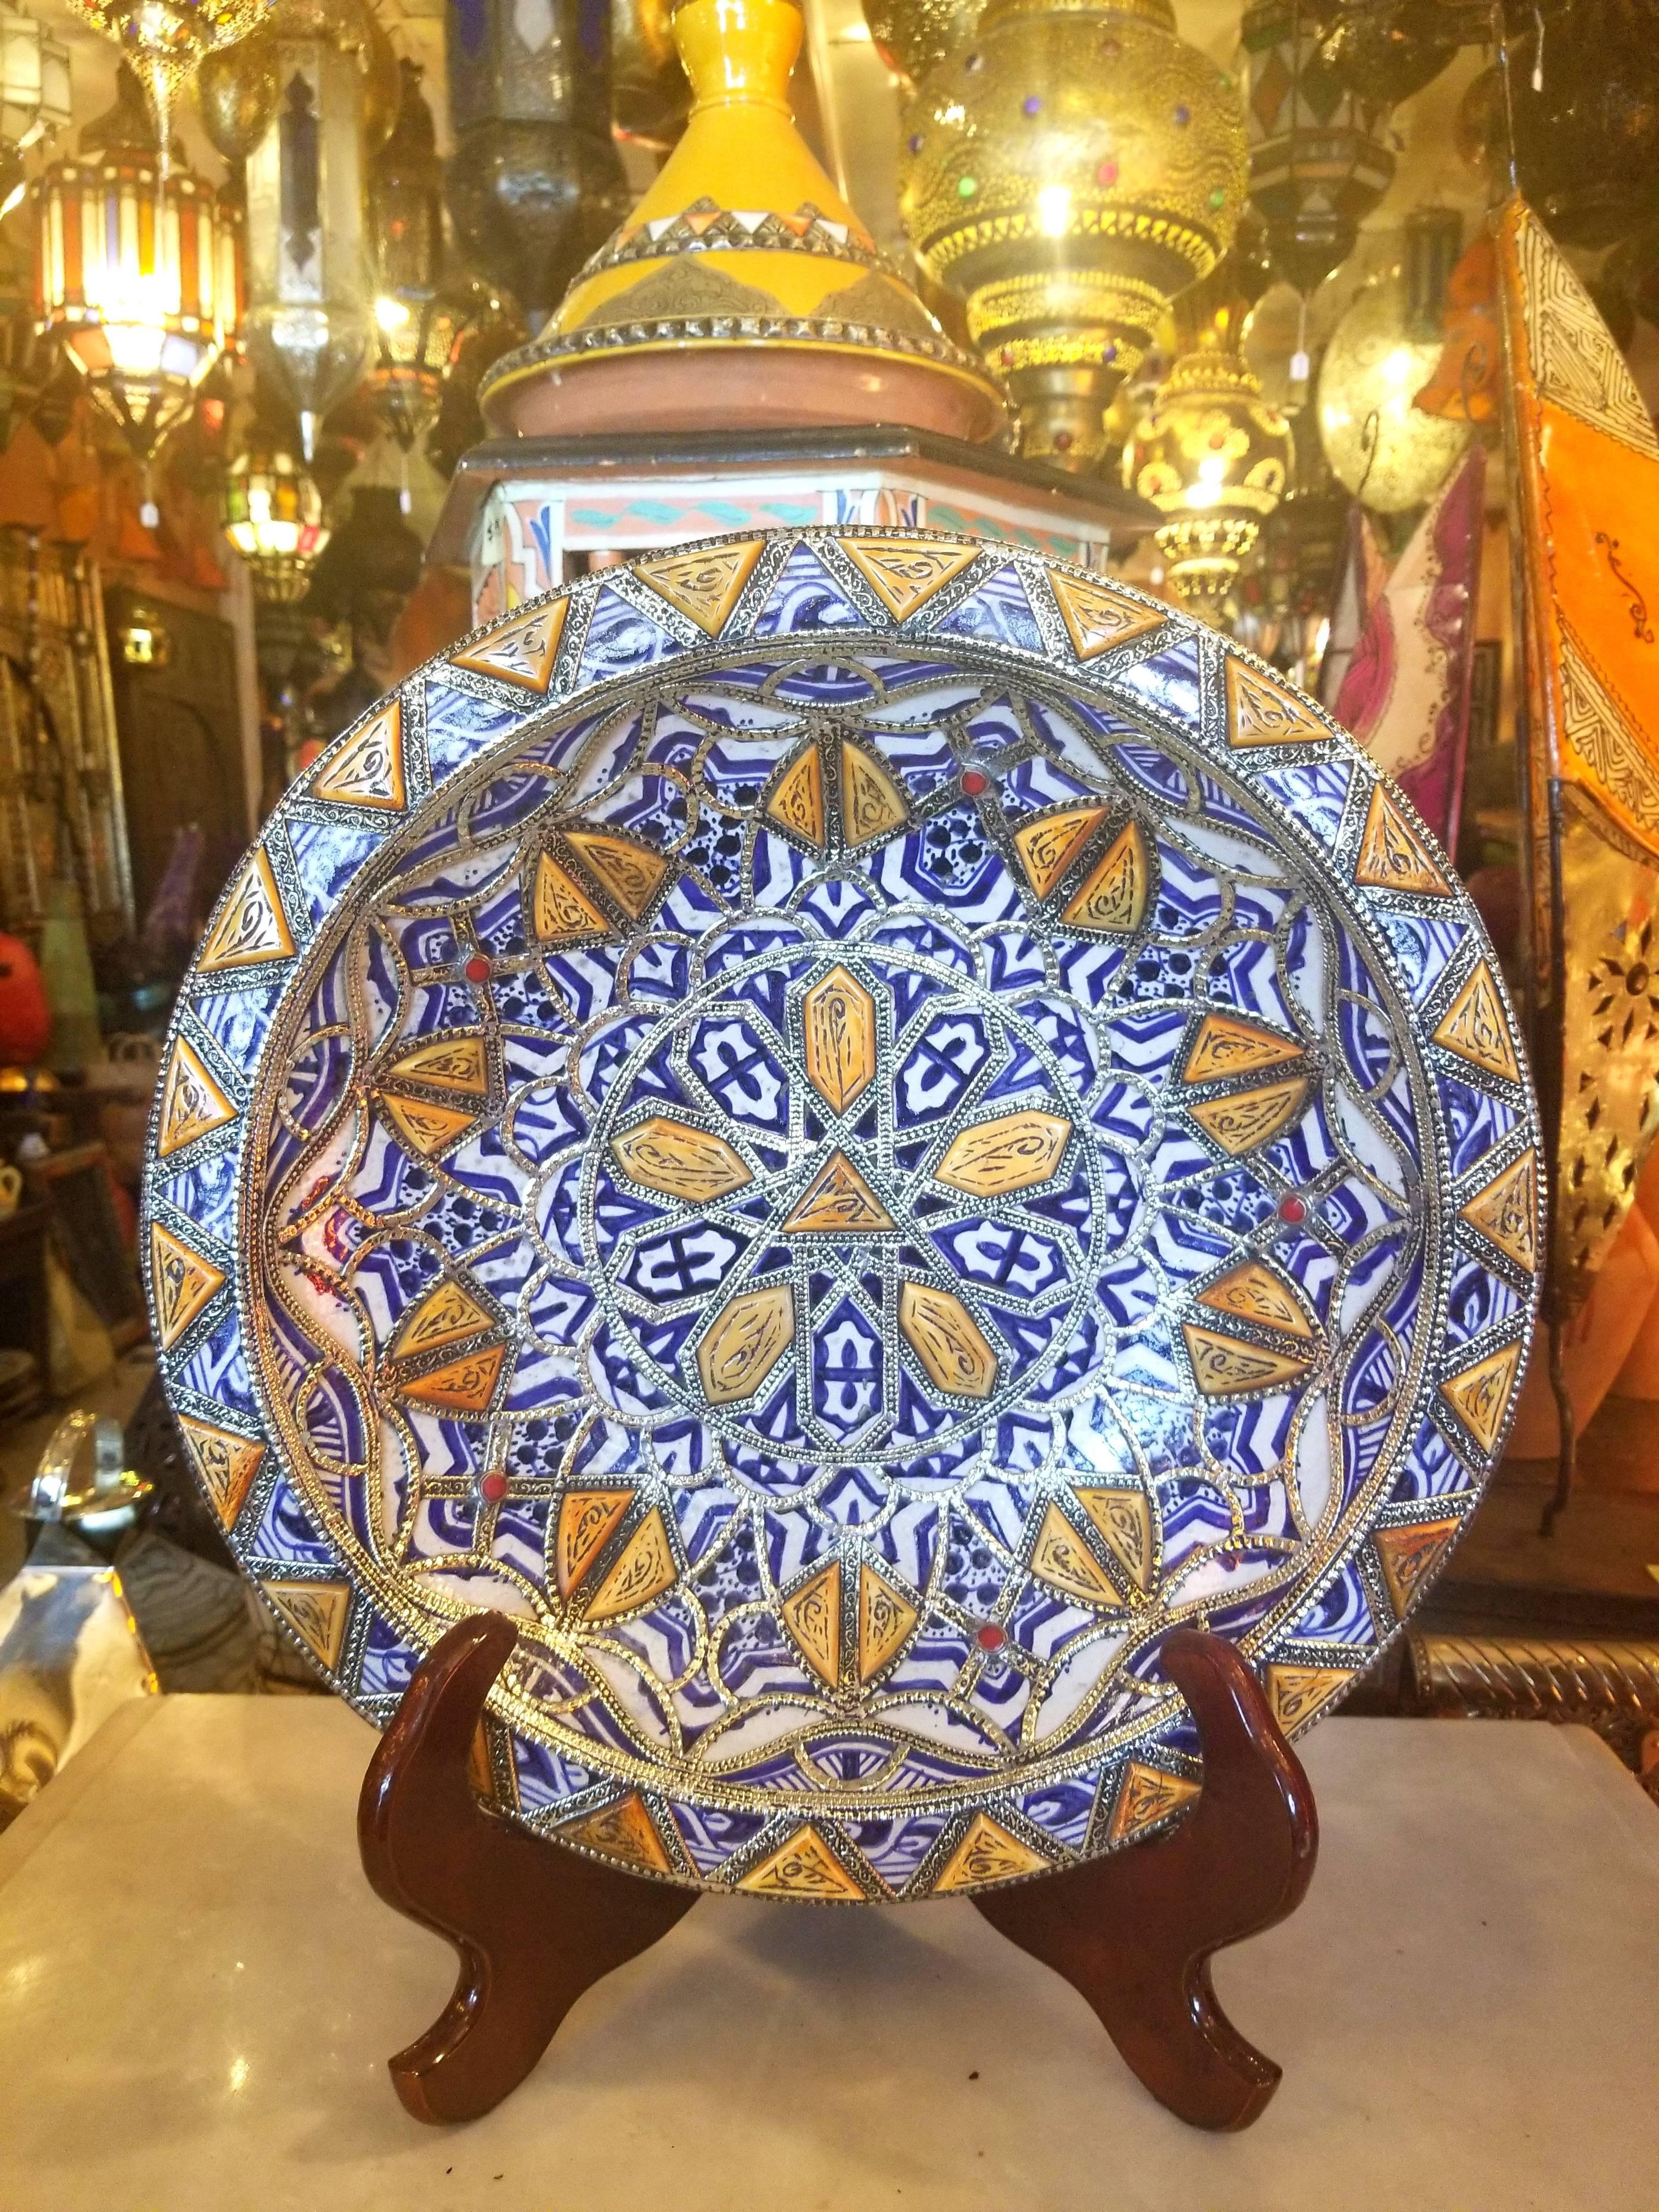 A rare or one of a kind exquisite Moroccan plate / charger for decoration purpose only. This plate in hand-painted in blue and white, and inlaid with metal. Henna dyed Camel bone fragments throughout. This plate would be a great add-on to any décor.